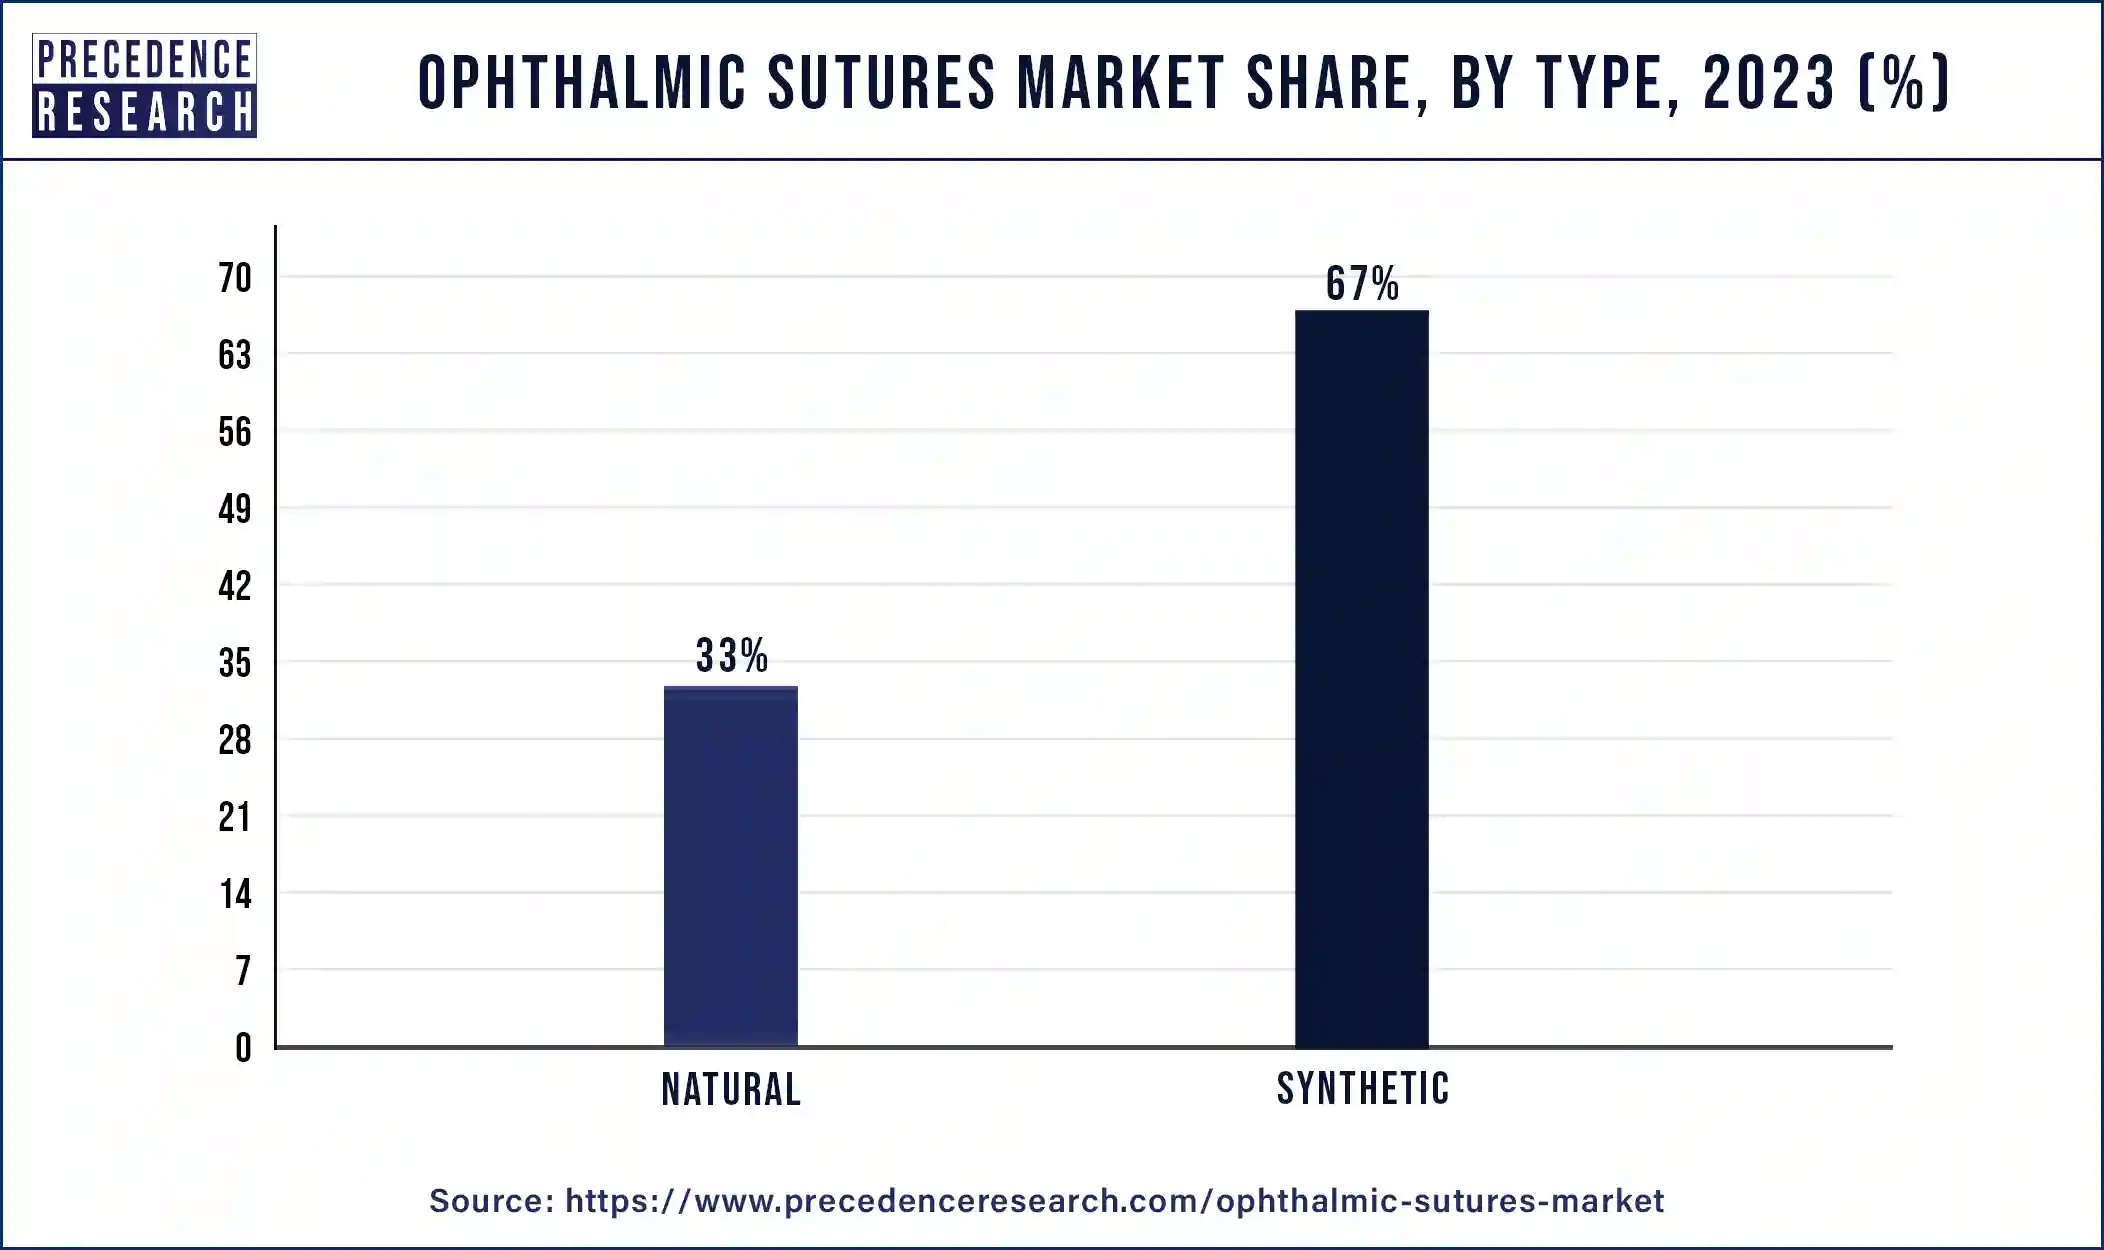 Ophthalmic Sutures Market Share, By Type, 2023 (%)